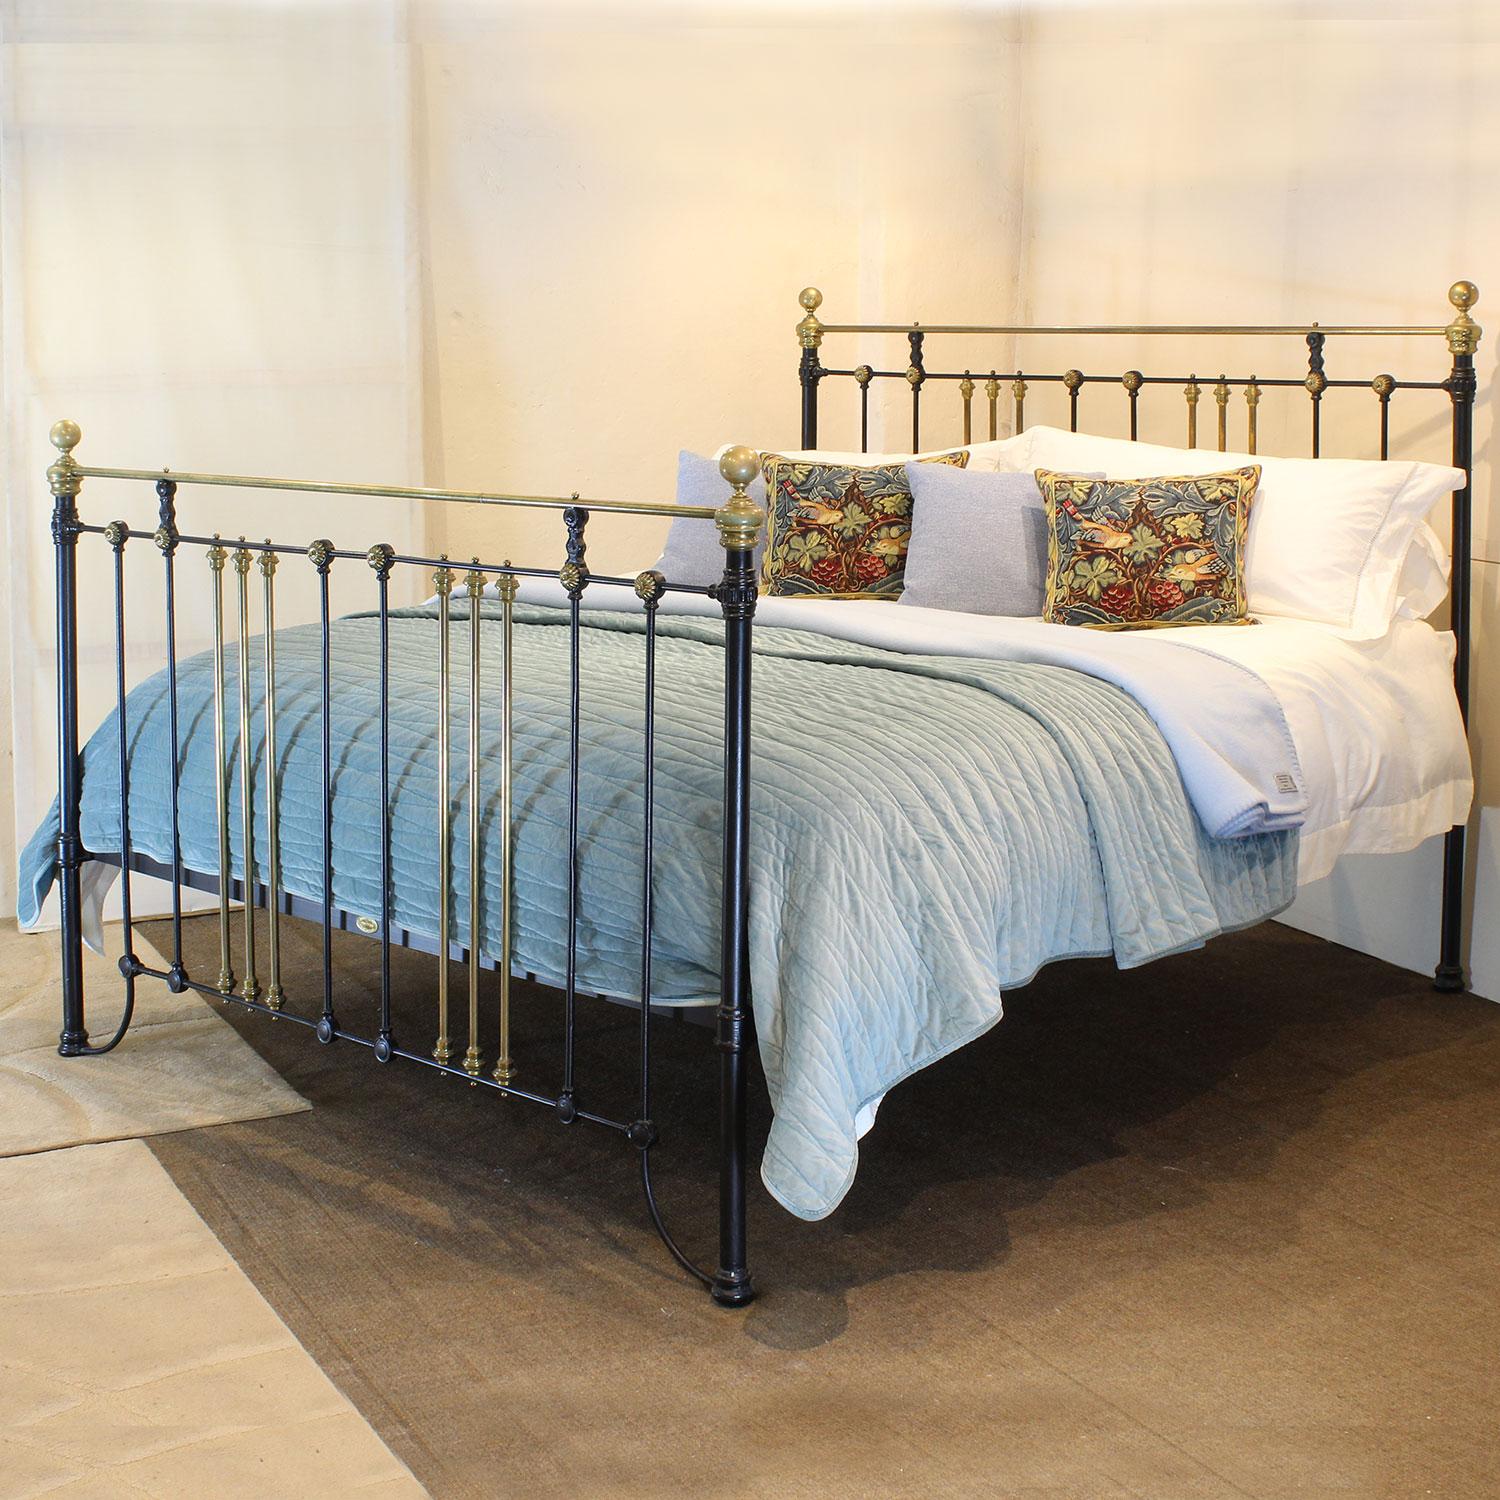 An attractive 6ft wide (72 inches) brass and iron bedstead finished in black with brass rosette decoration, adapted and extended from an original Victorian frame, circa 1895.

This bed accepts a UK Super King or Californian King 72 inch wide base